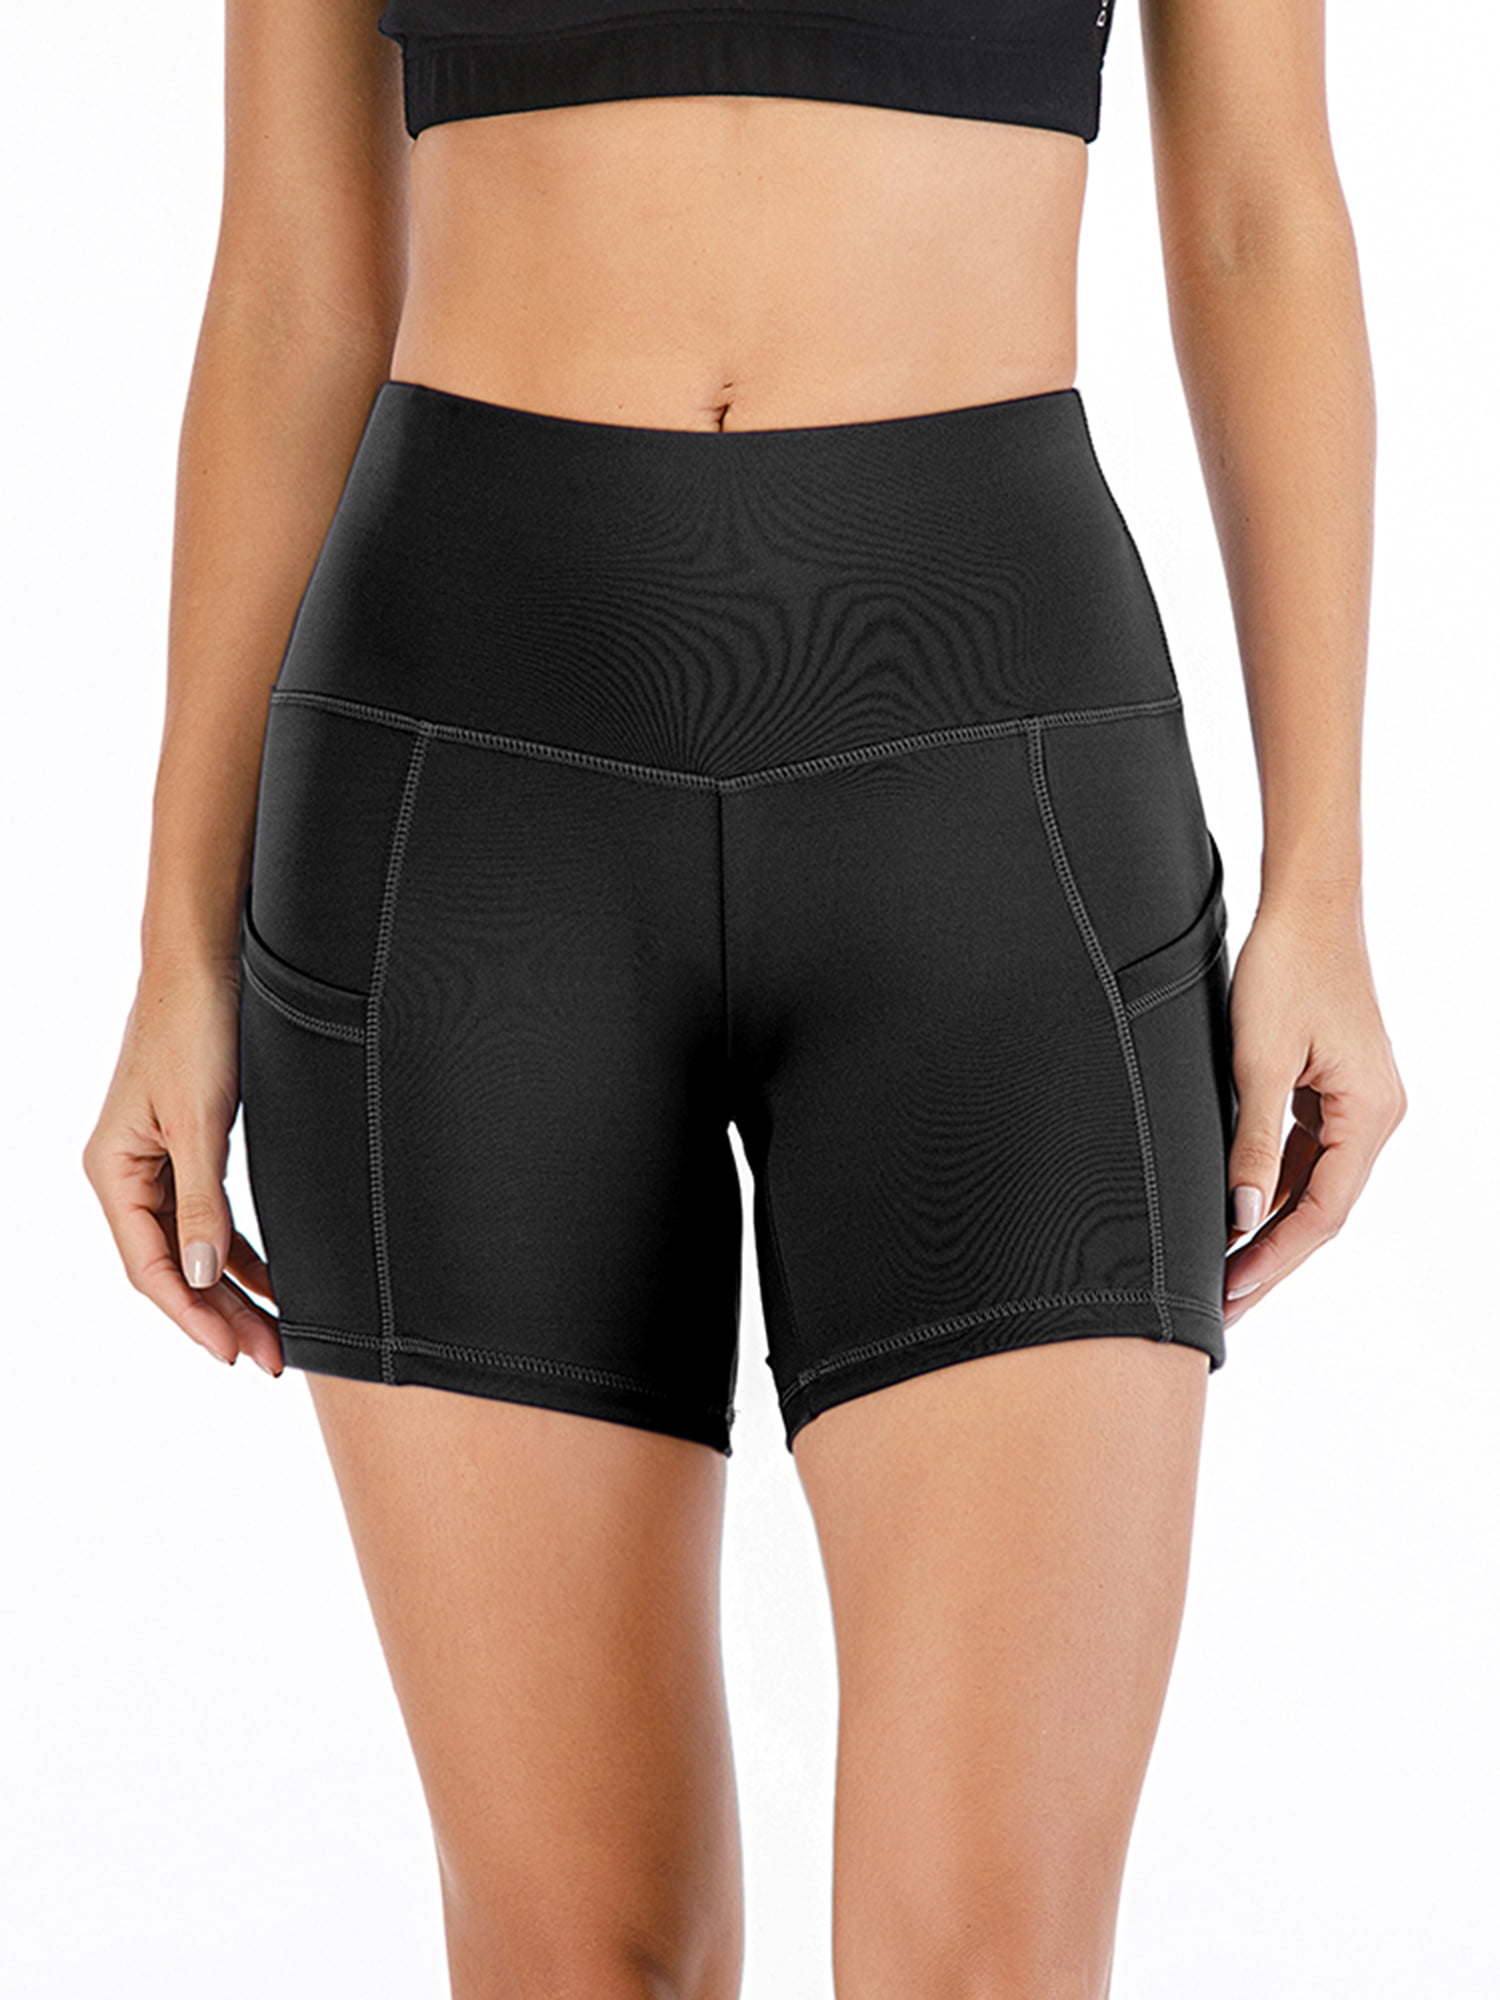 Women's High Waist Workout Yoga Running Compression Exercise Shorts Side Pockets 